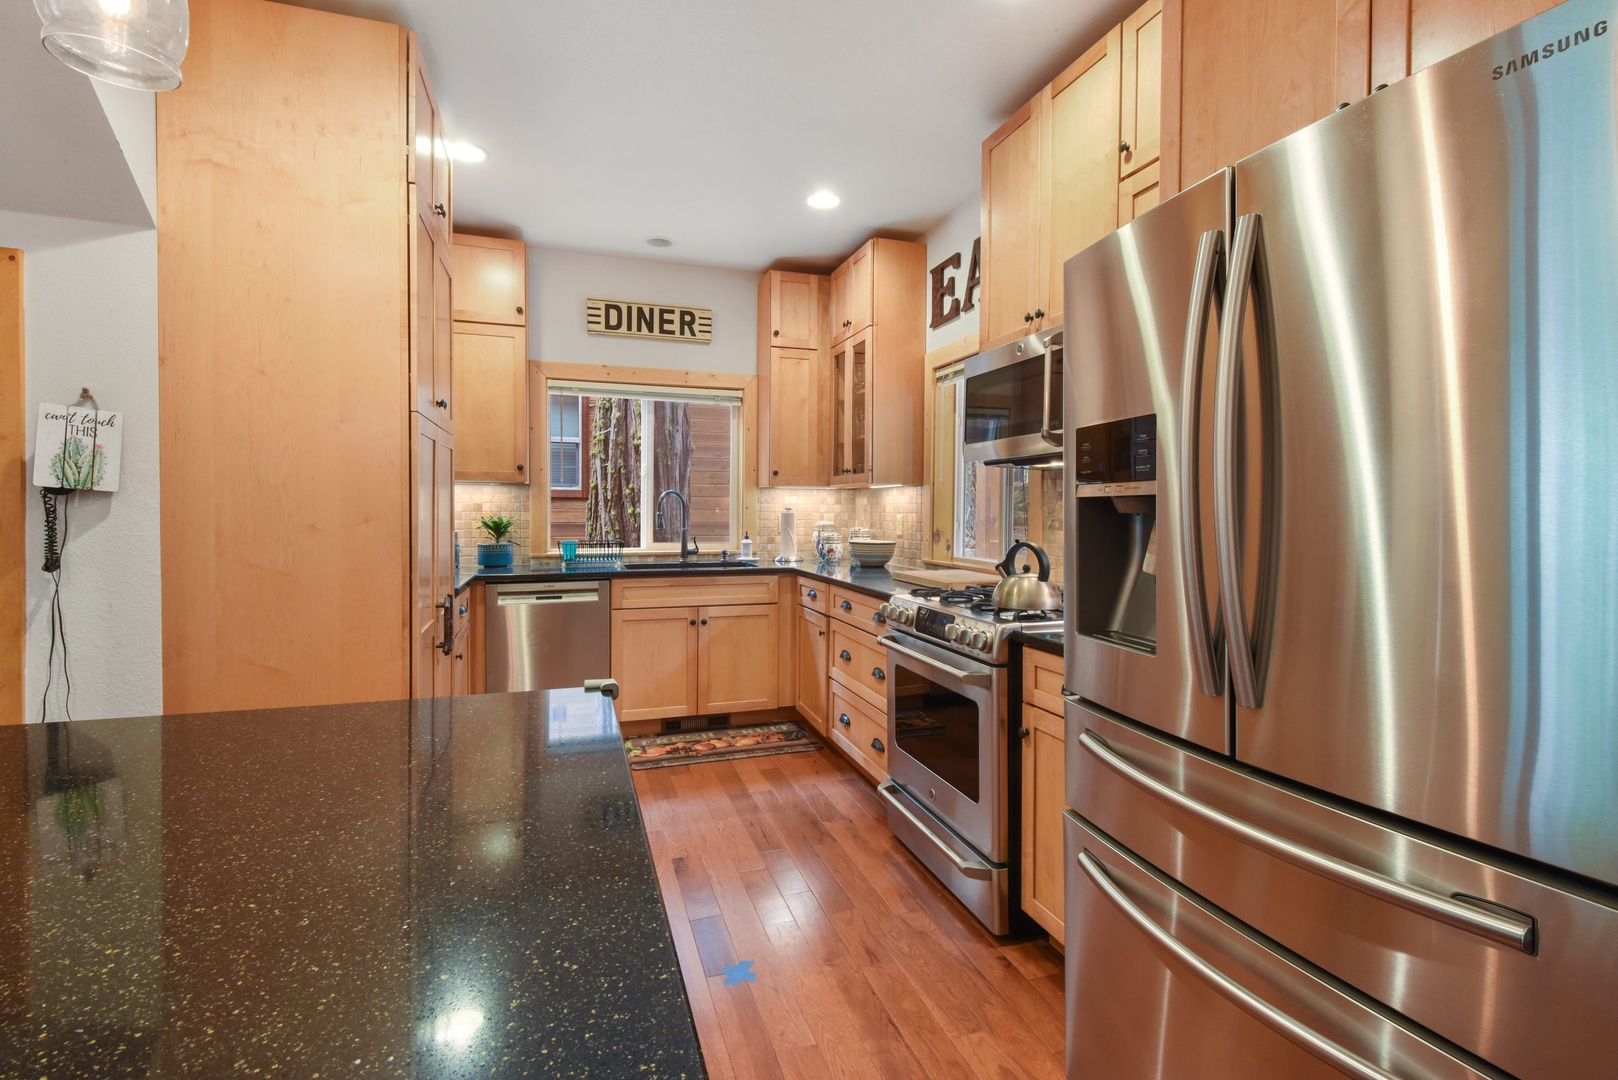 Kitchen with coffee maker, toaster, blender, stand mixer, and more